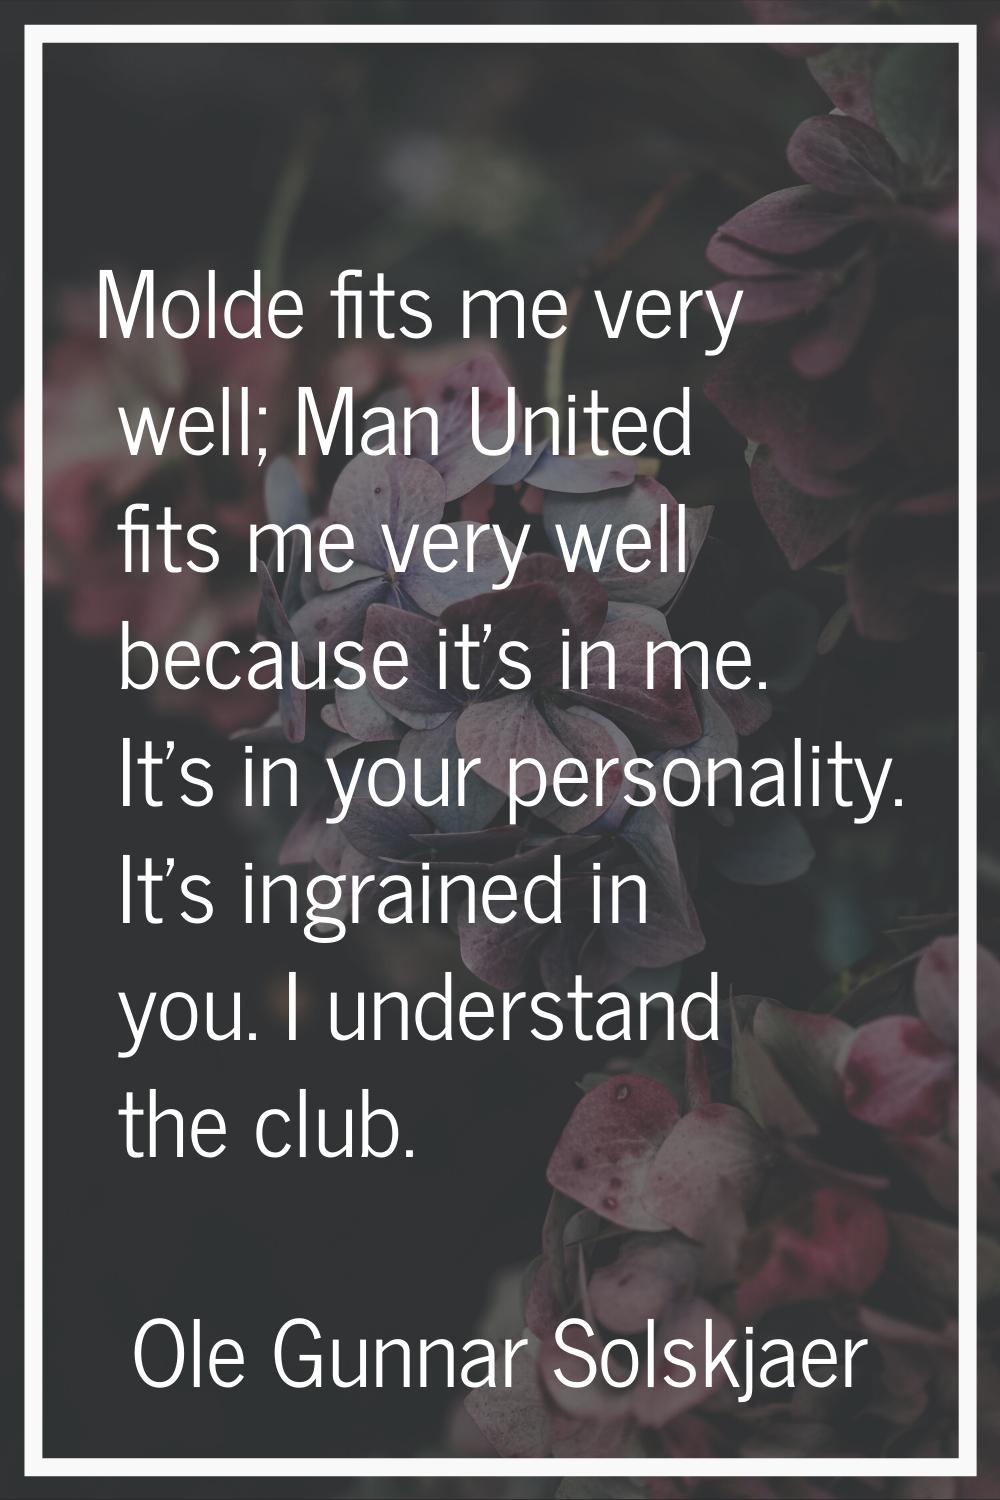 Molde fits me very well; Man United fits me very well because it's in me. It's in your personality.